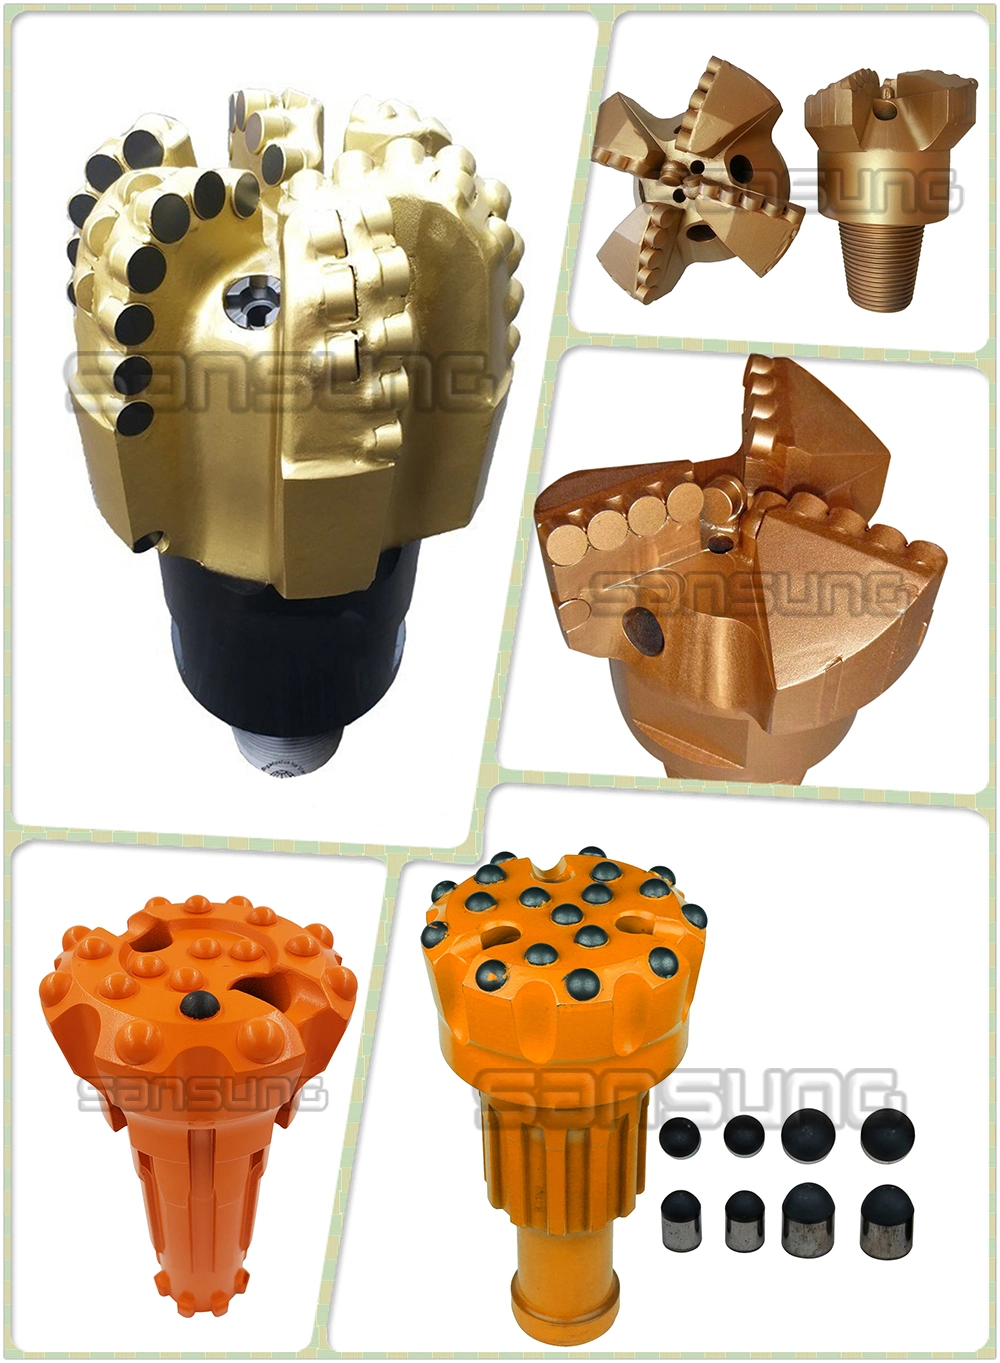 Flat PDC Cutters and PDC Button Inserts for Diamond Drill Bits